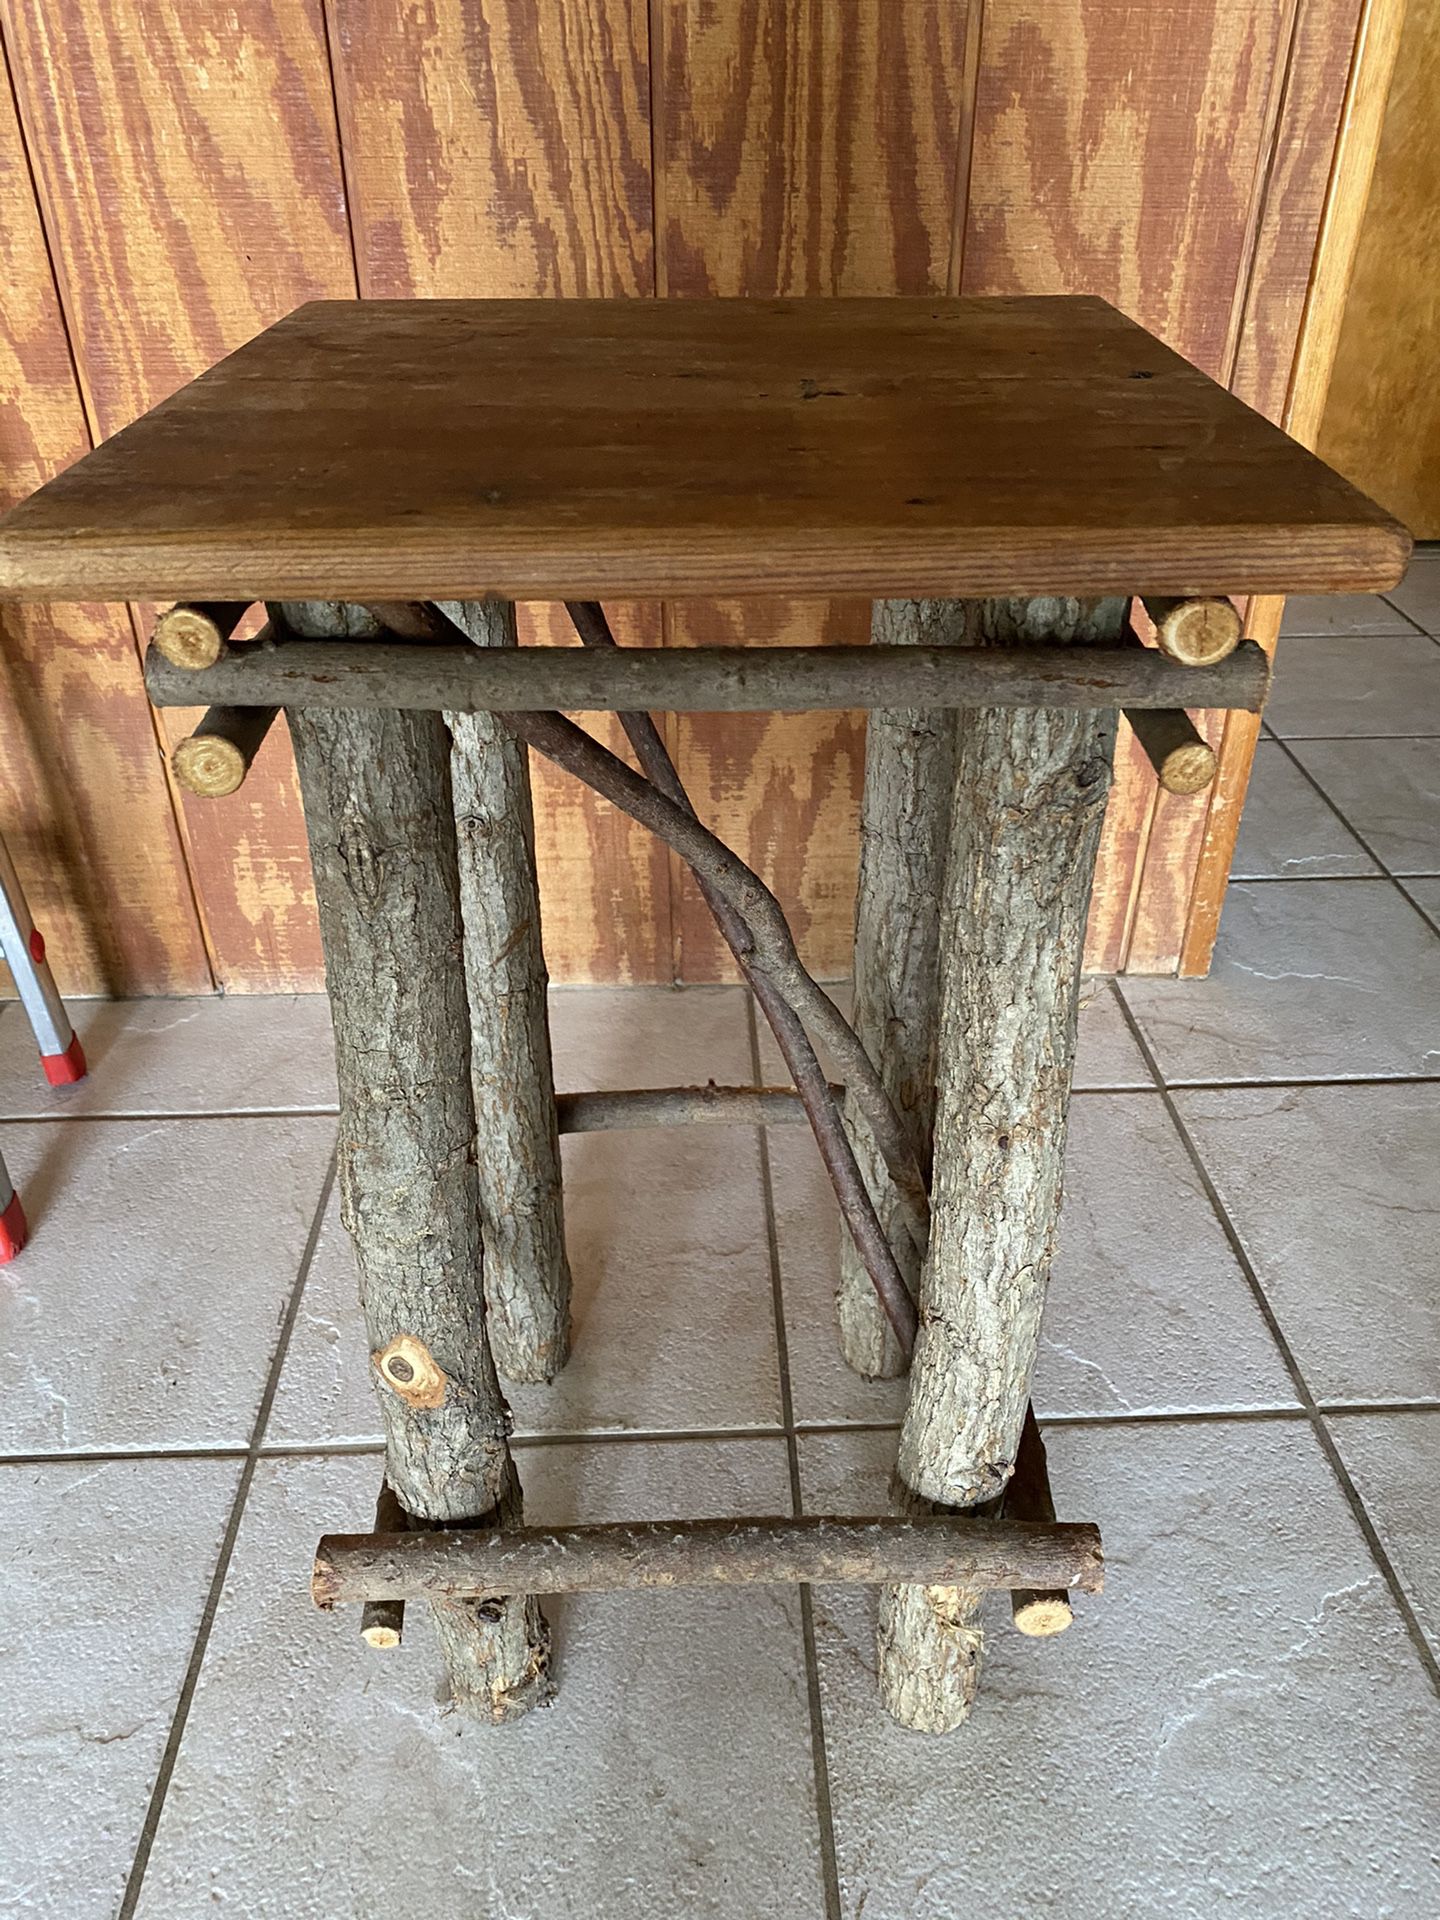 Rustic wood table (top is 14x14”) and two wooden shelves